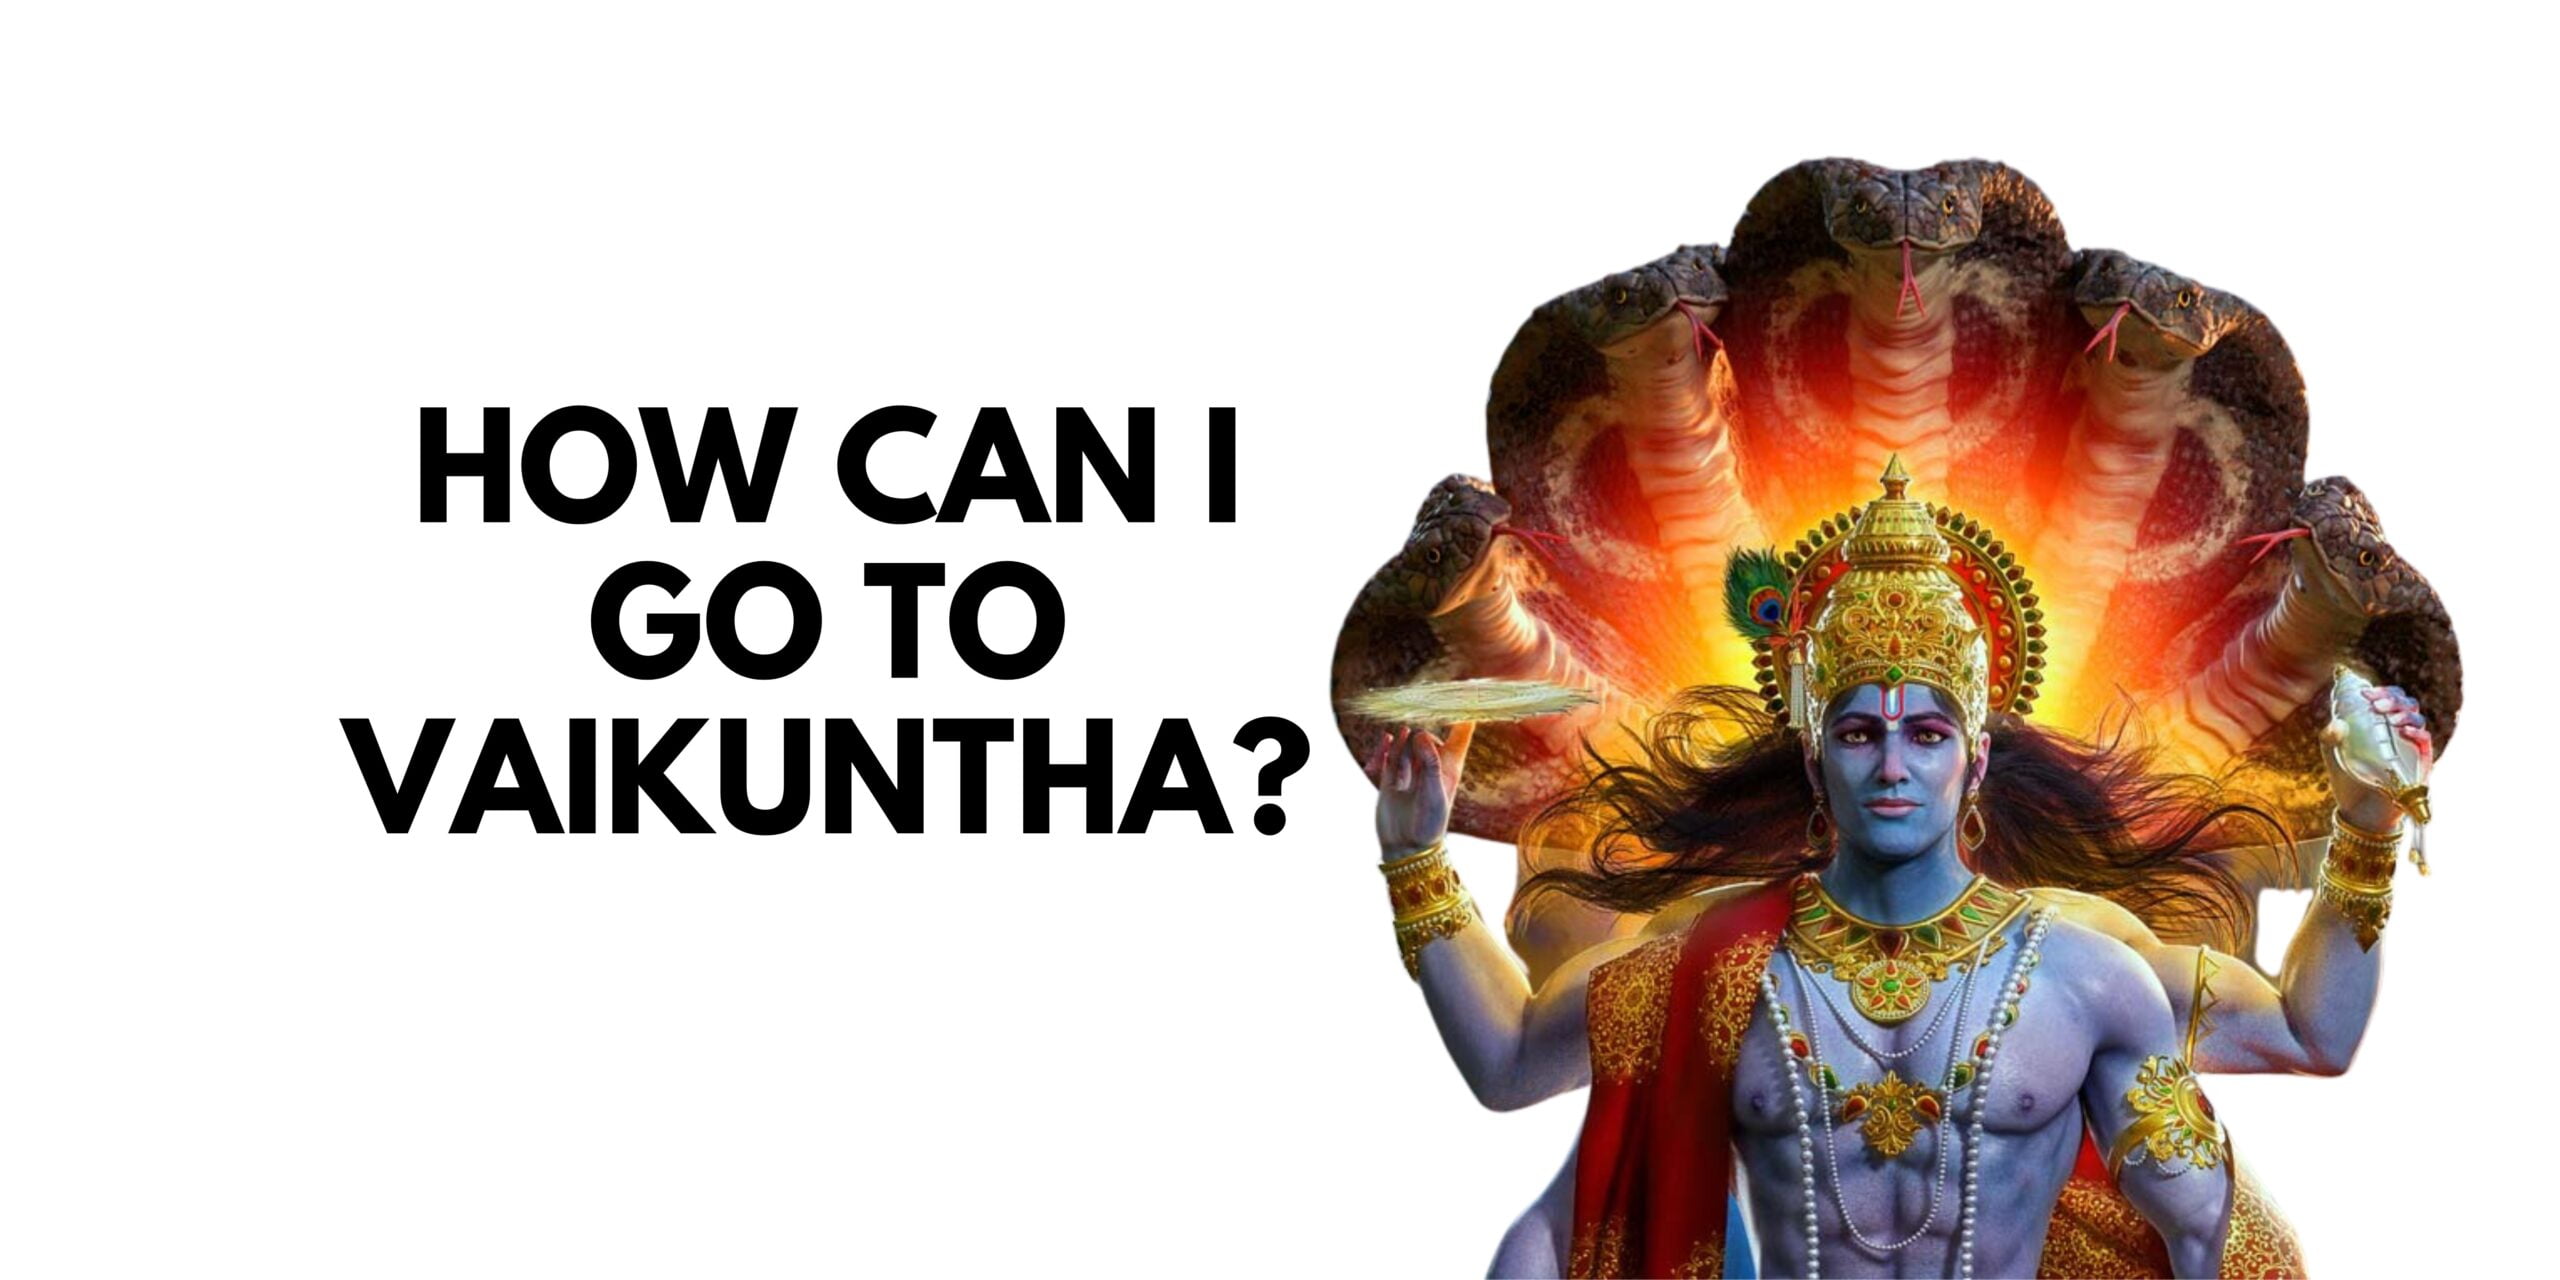 How can I go to Vaikuntha?